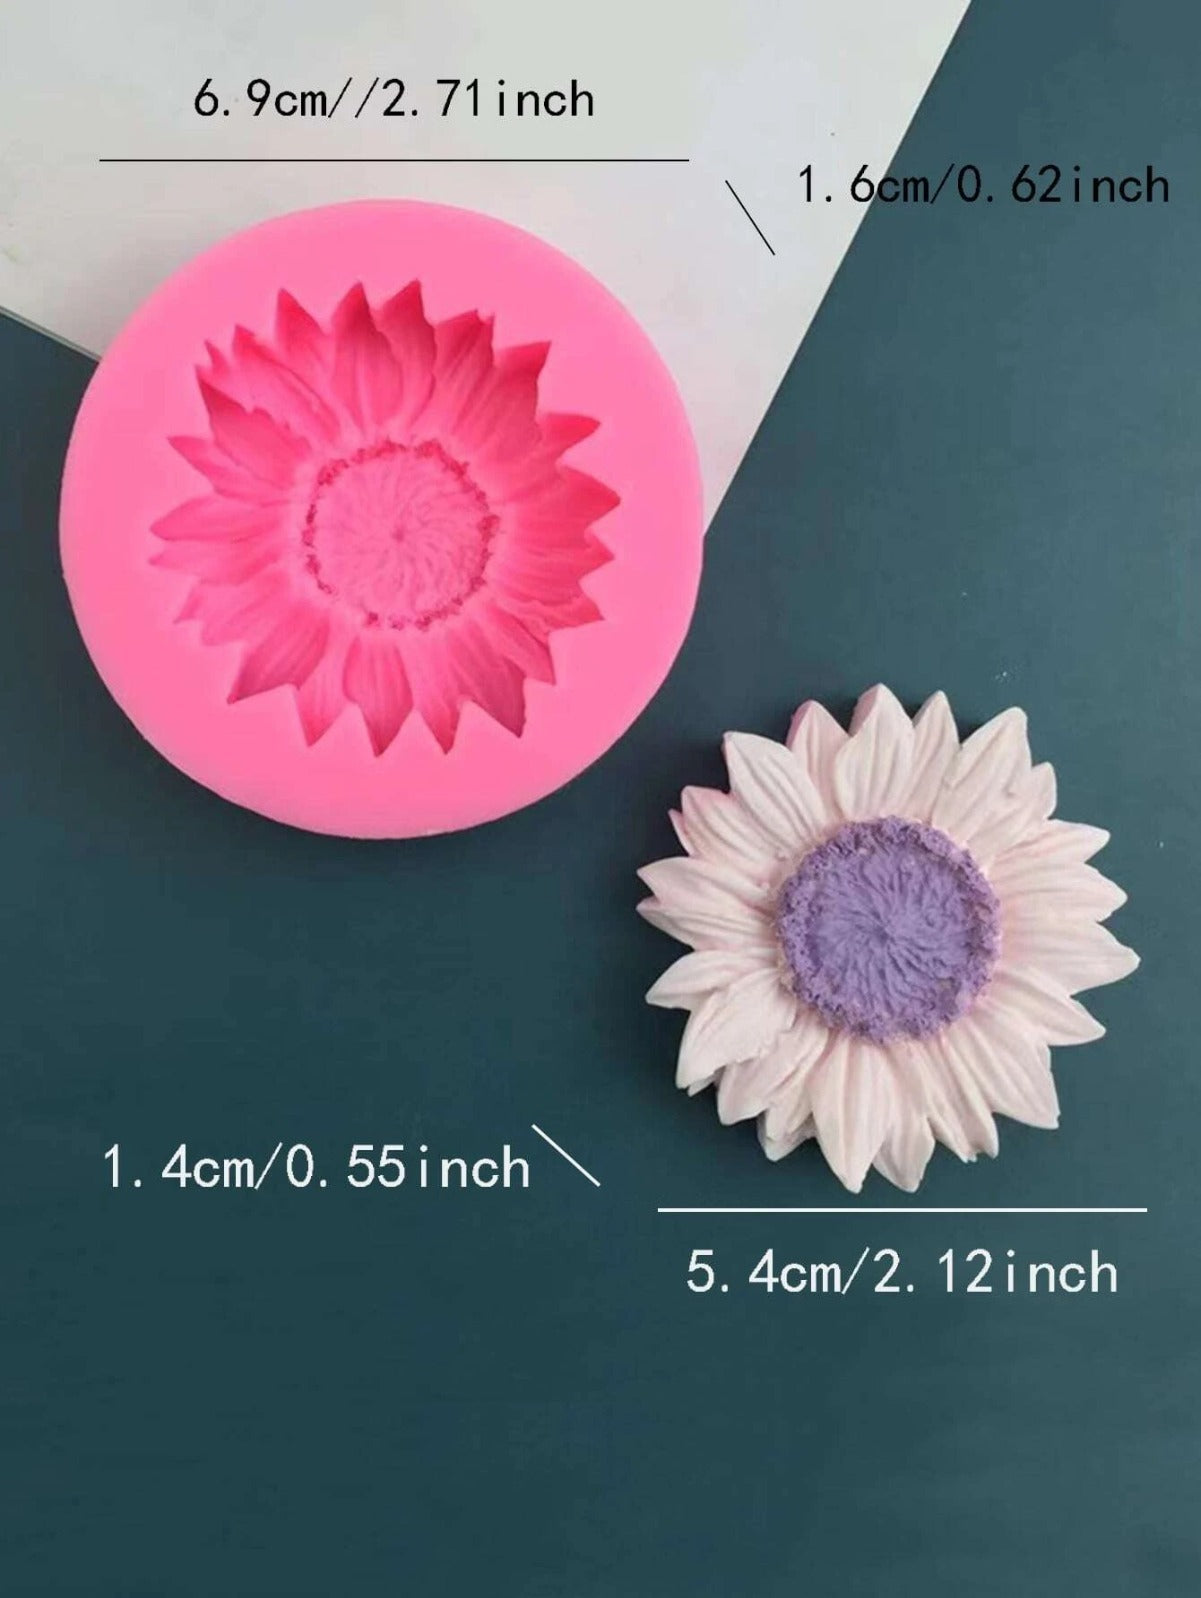 Auradecor Sun Flower Mould for Candle Making